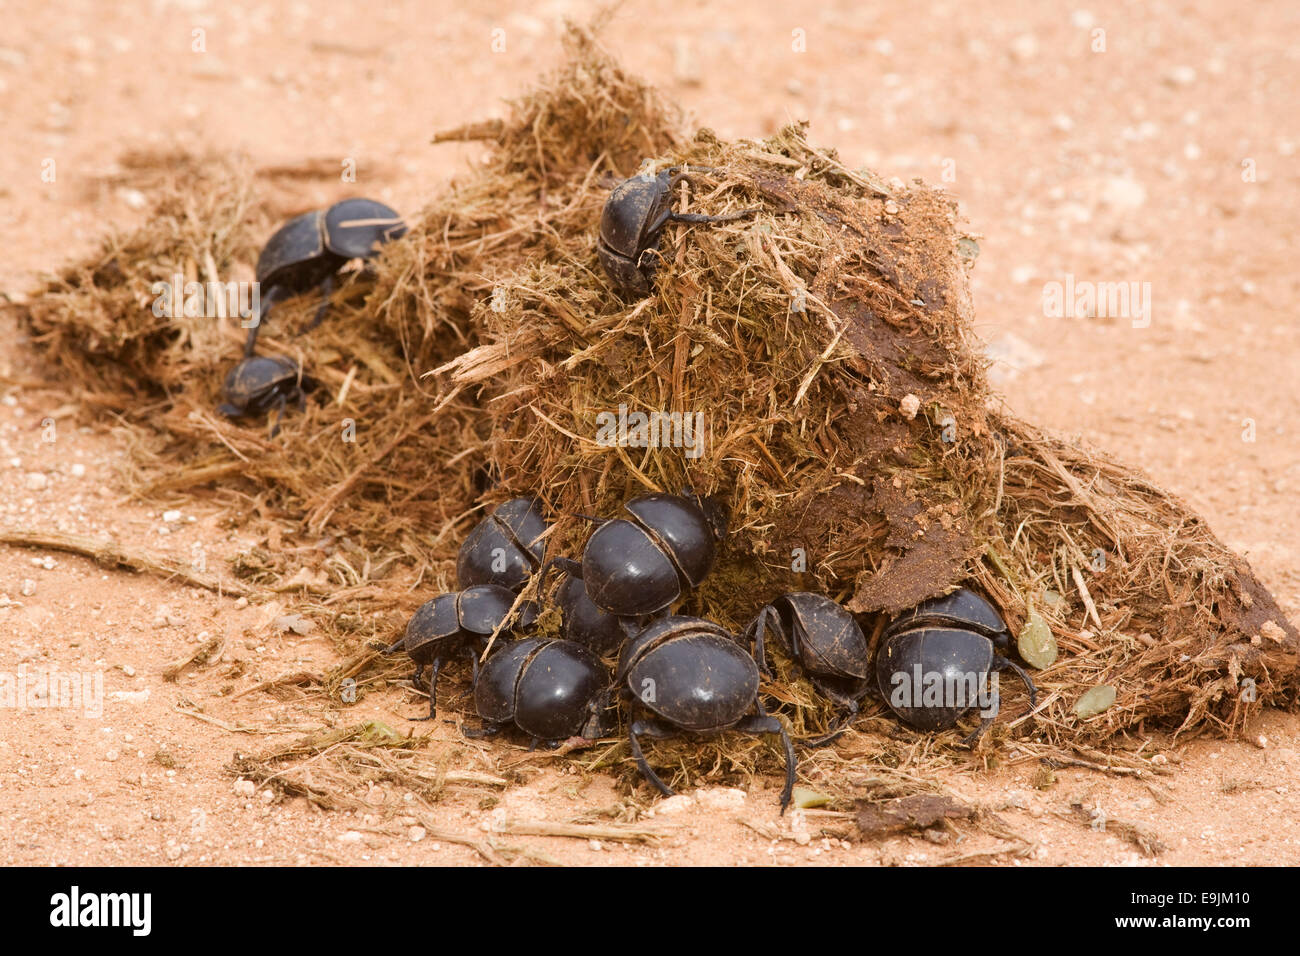 Flightless dung beetles, Circellium bacchus, on elephant dung, Addo Elephant National Park, Eastern Cape, South Africa Stock Photo